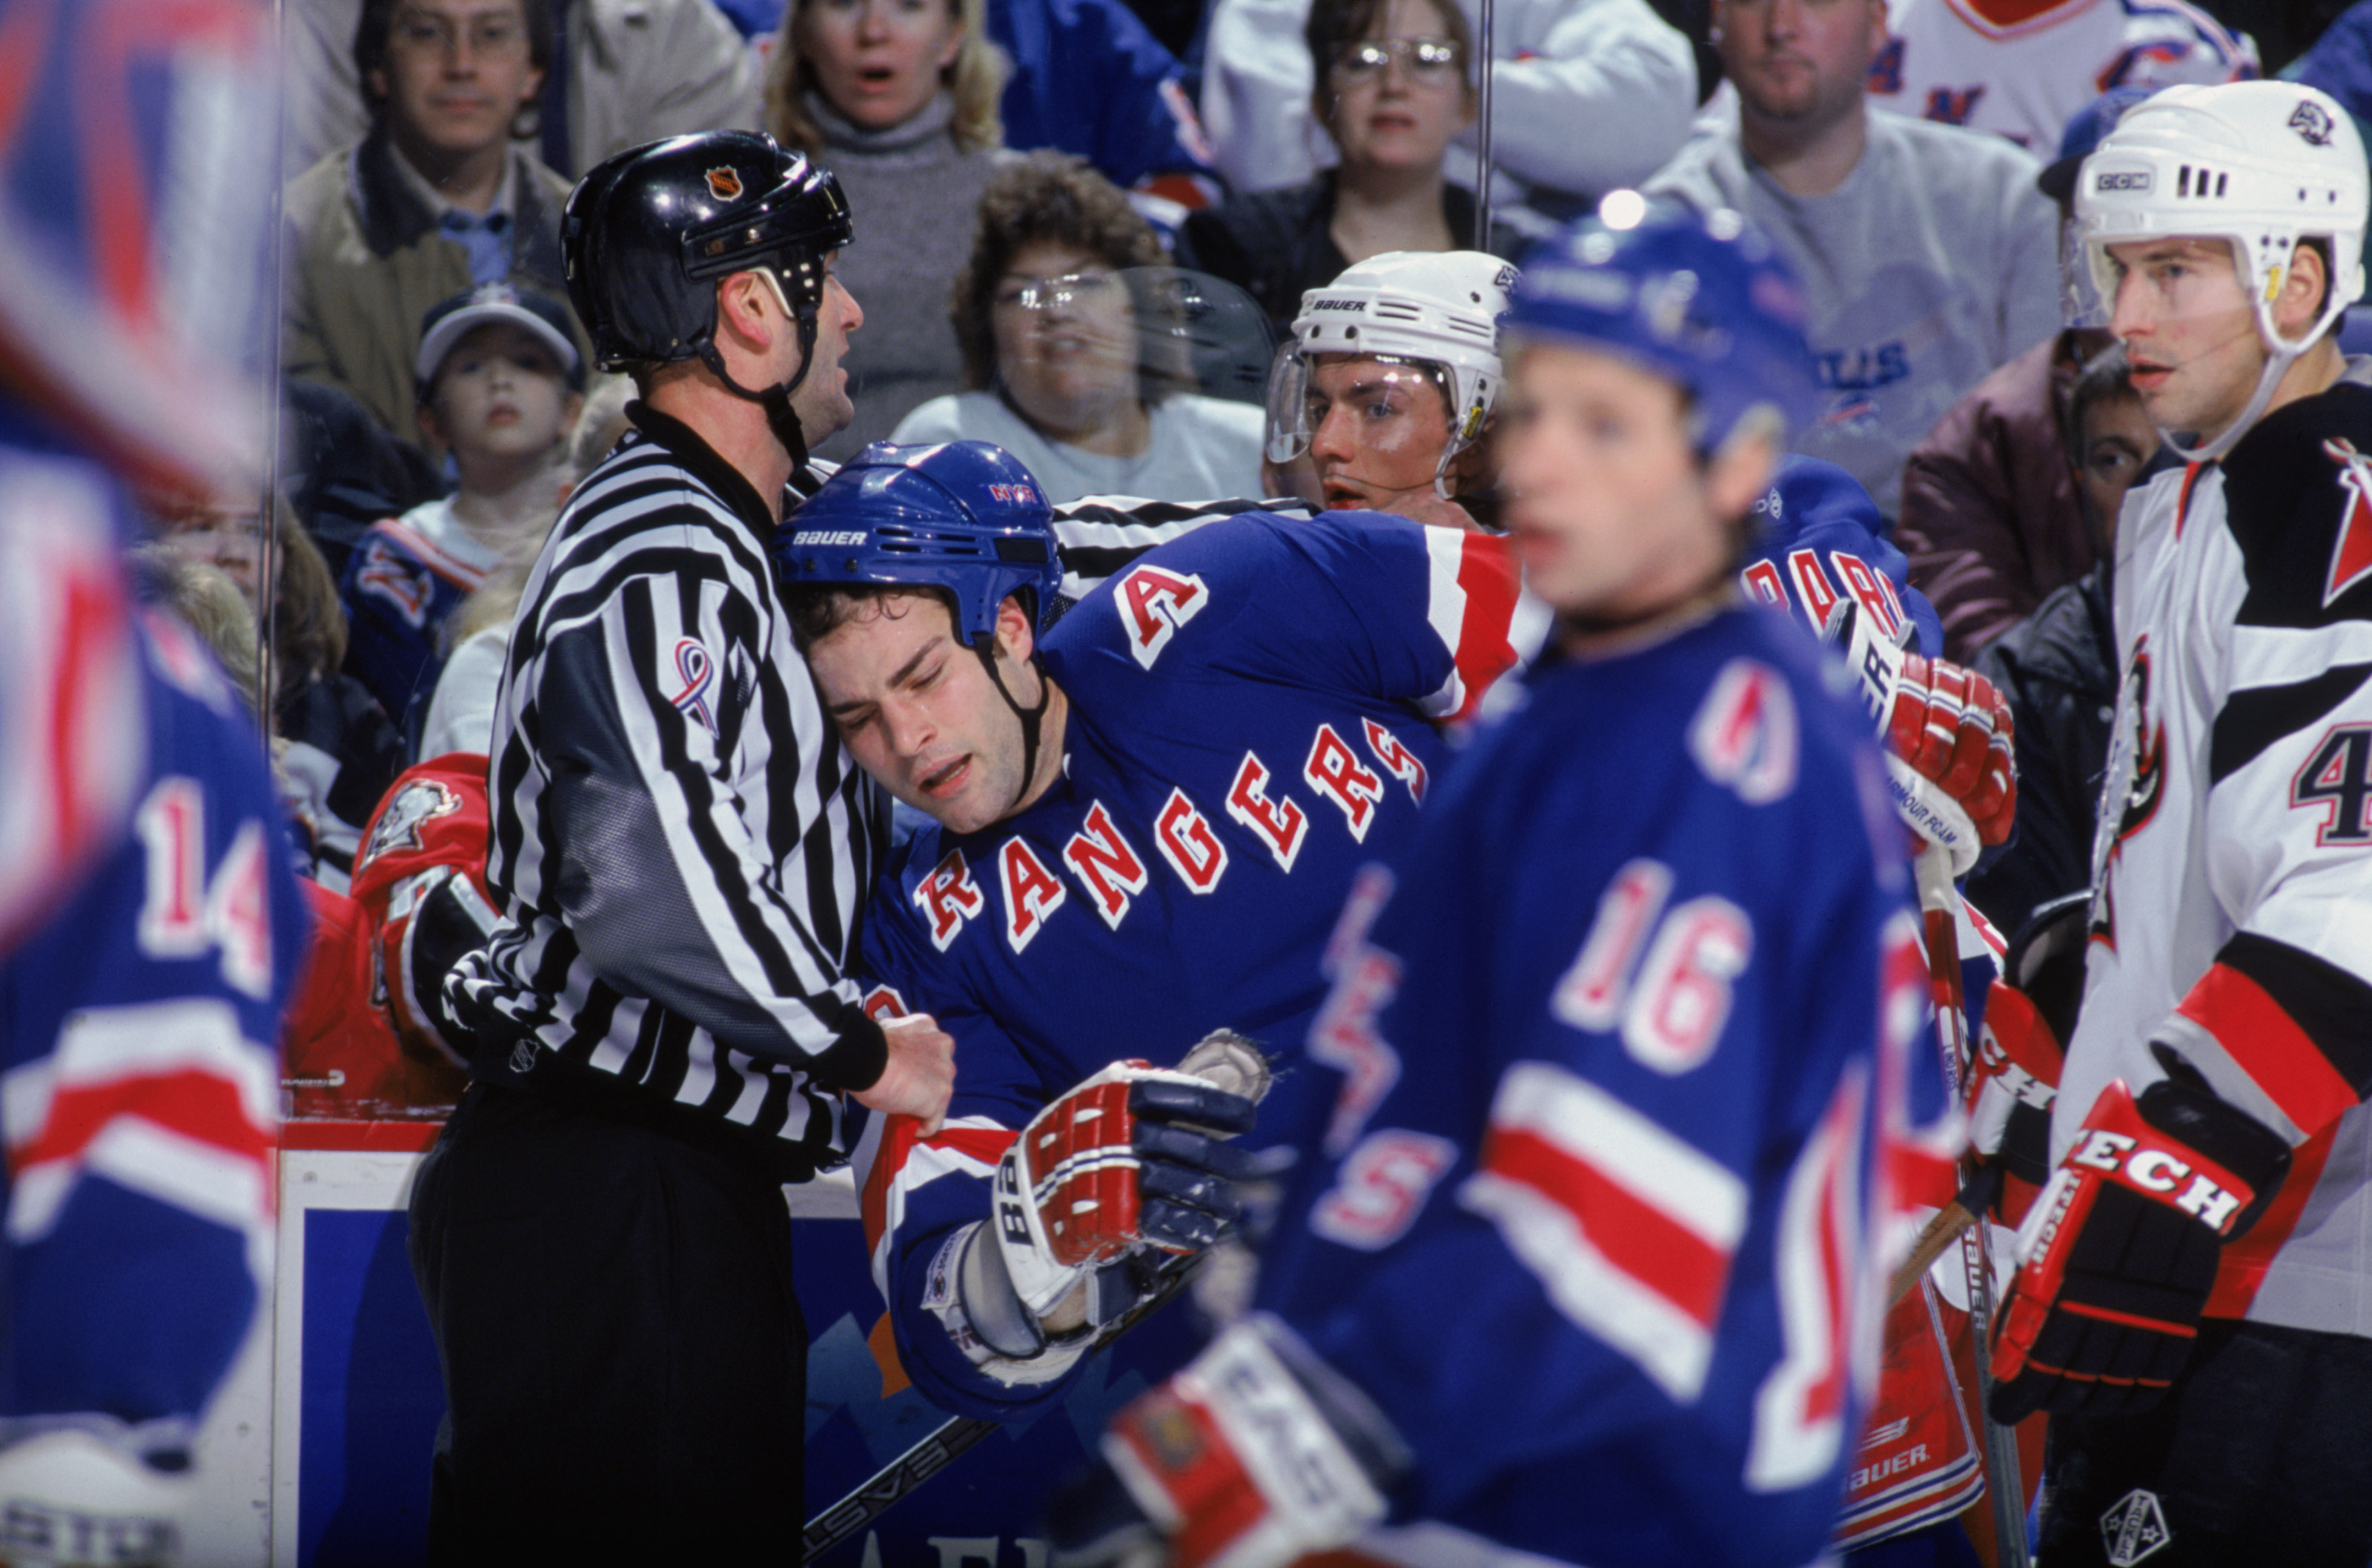 August 20 in New York Rangers history, Eric Lindros becomes a Ranger